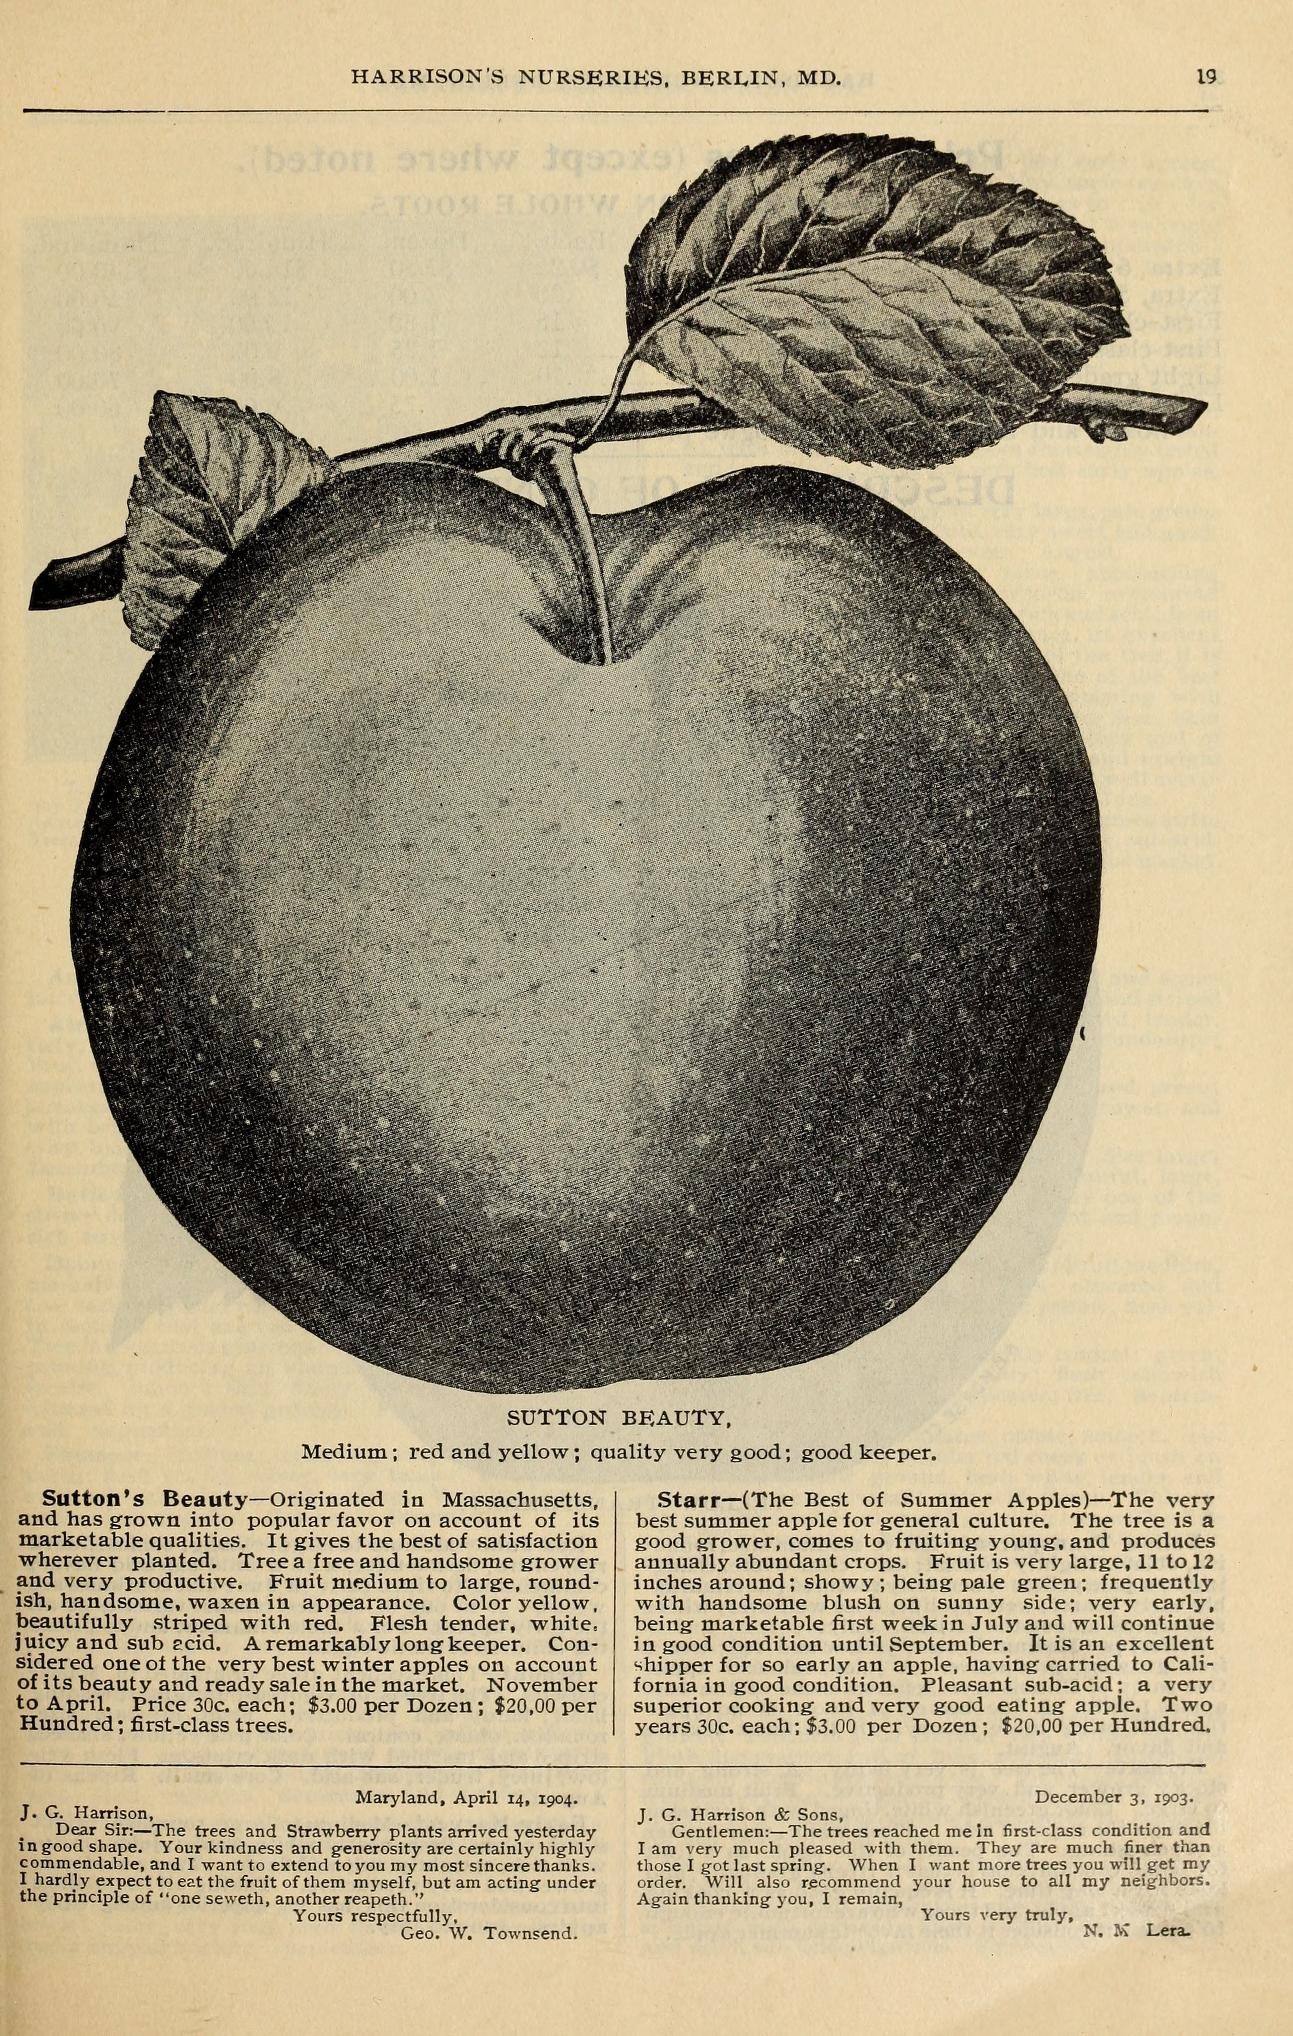 an old apple is depicted in this book